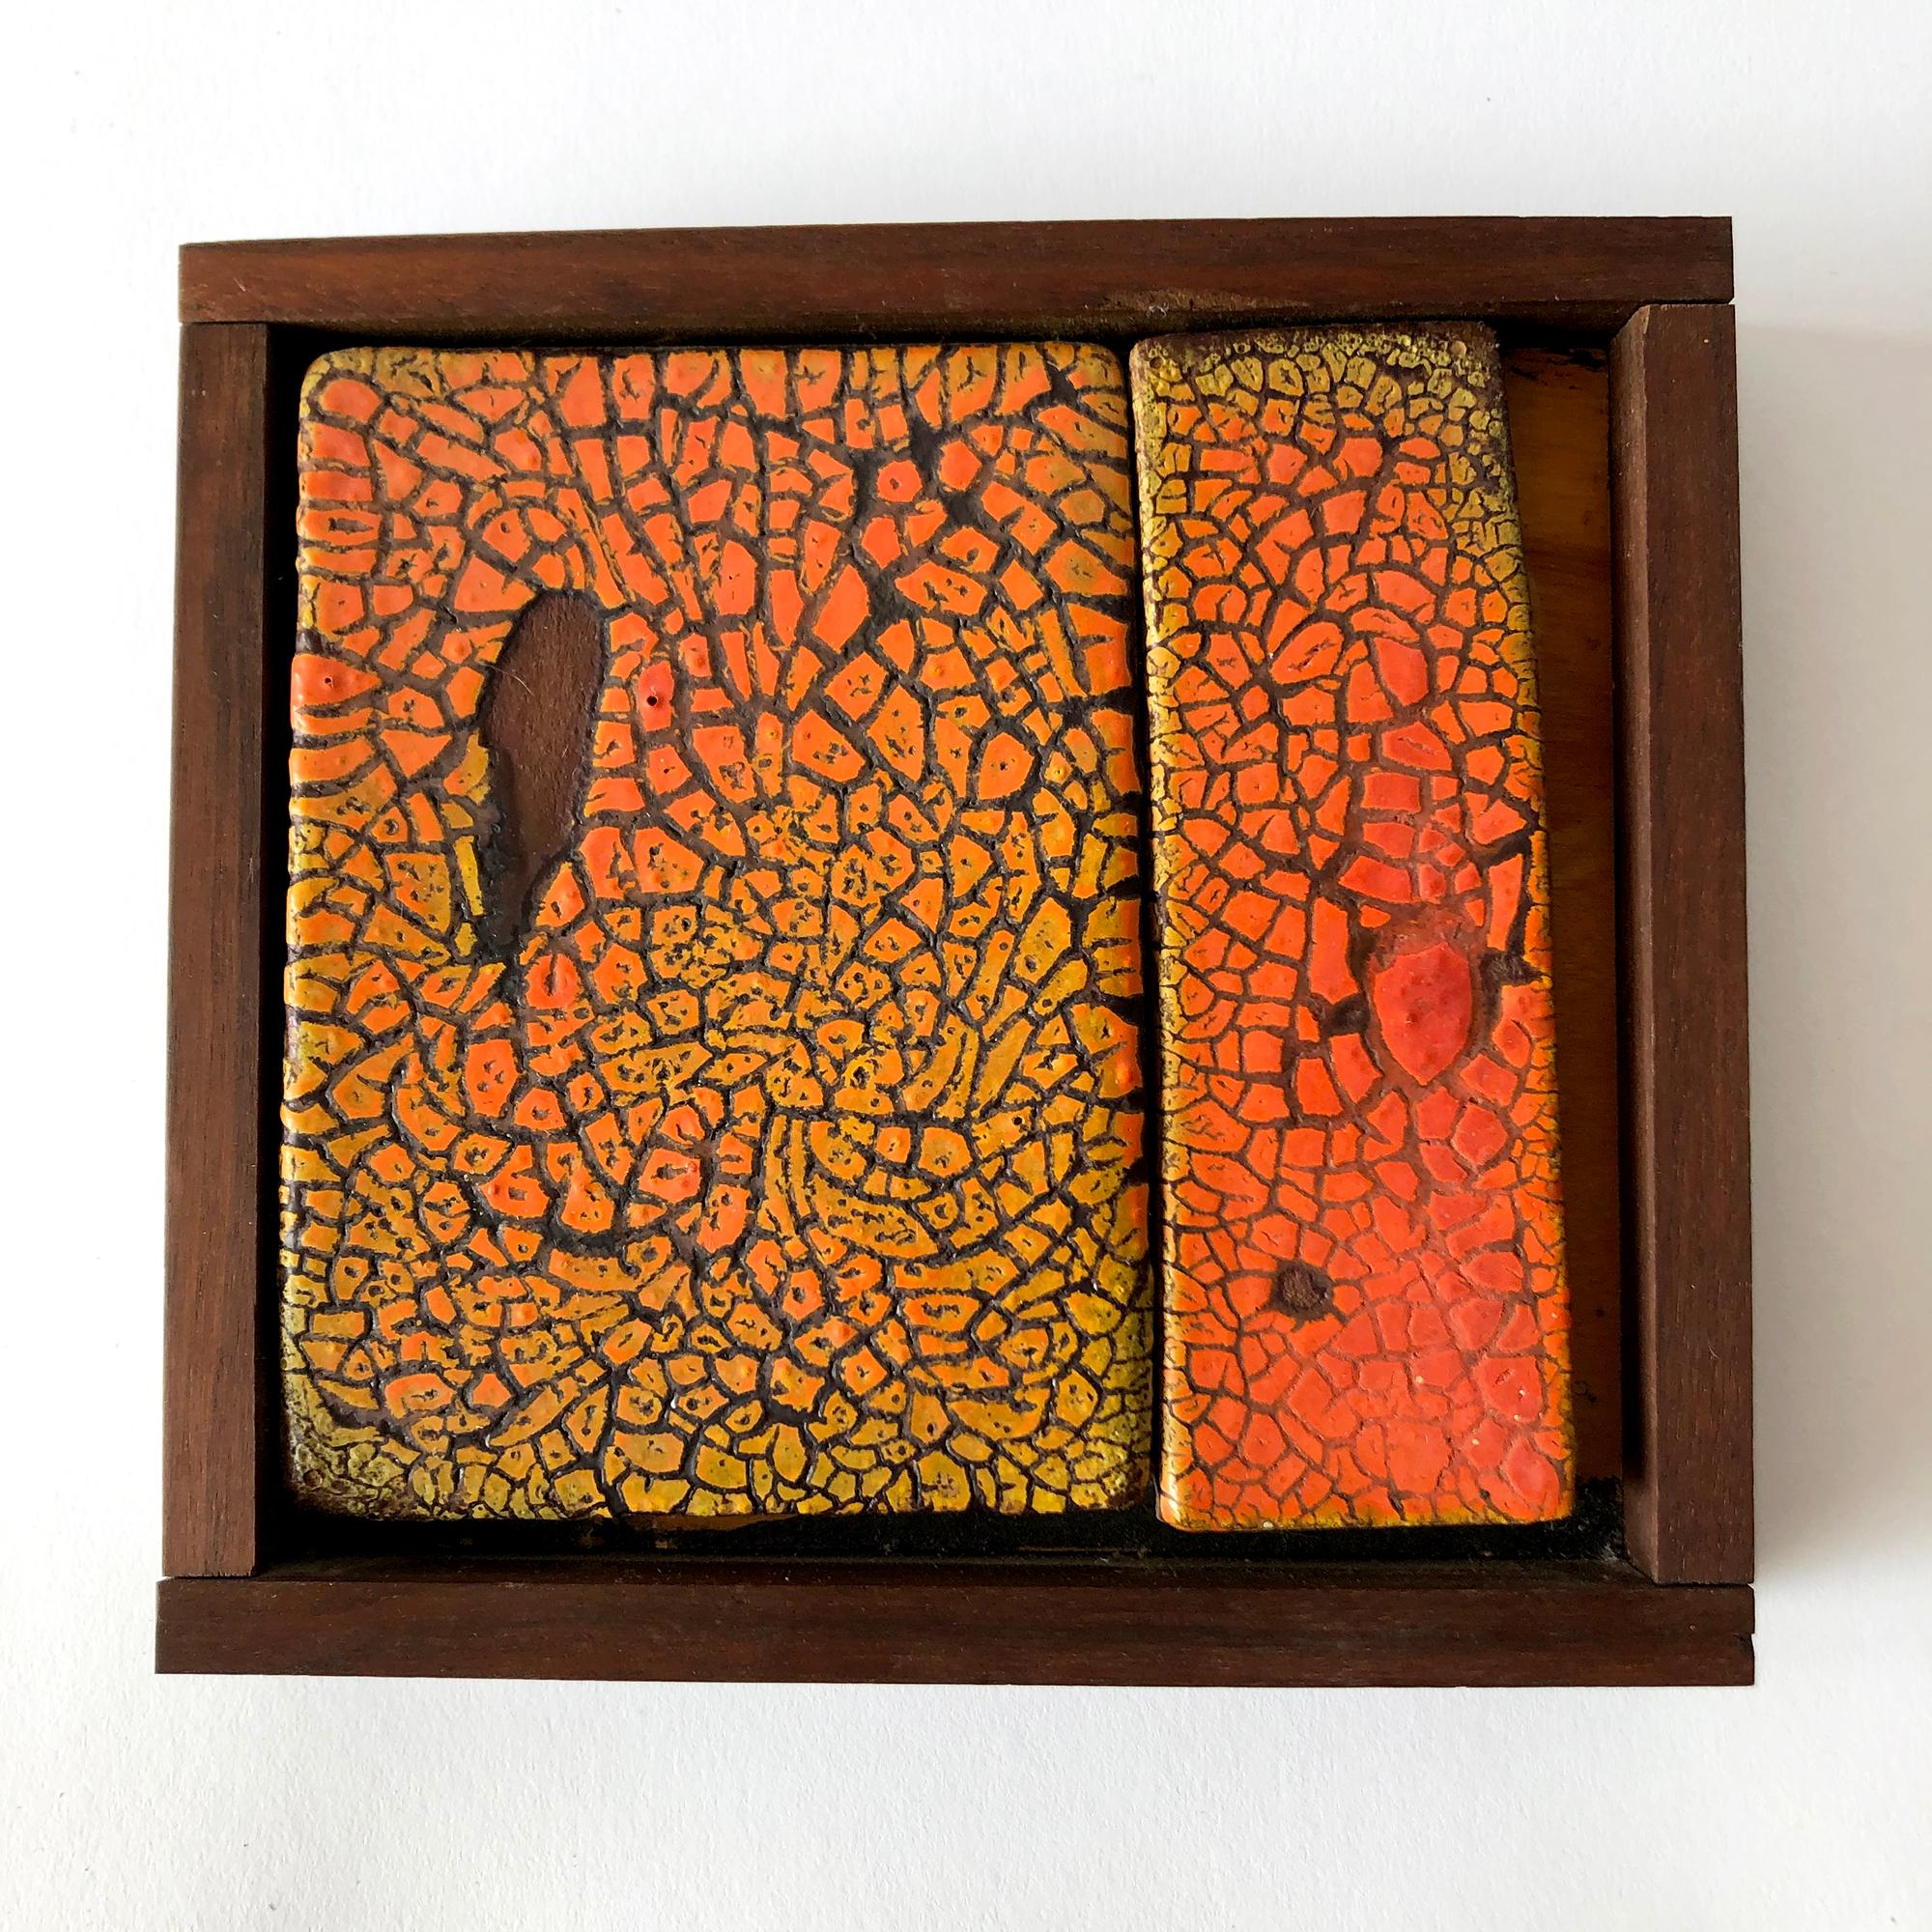 Rare, historical example of two tiles with craquelure glaze and framed in redwood, created by ceramist and sculptor Doyle Lane. Clay painting measures 7